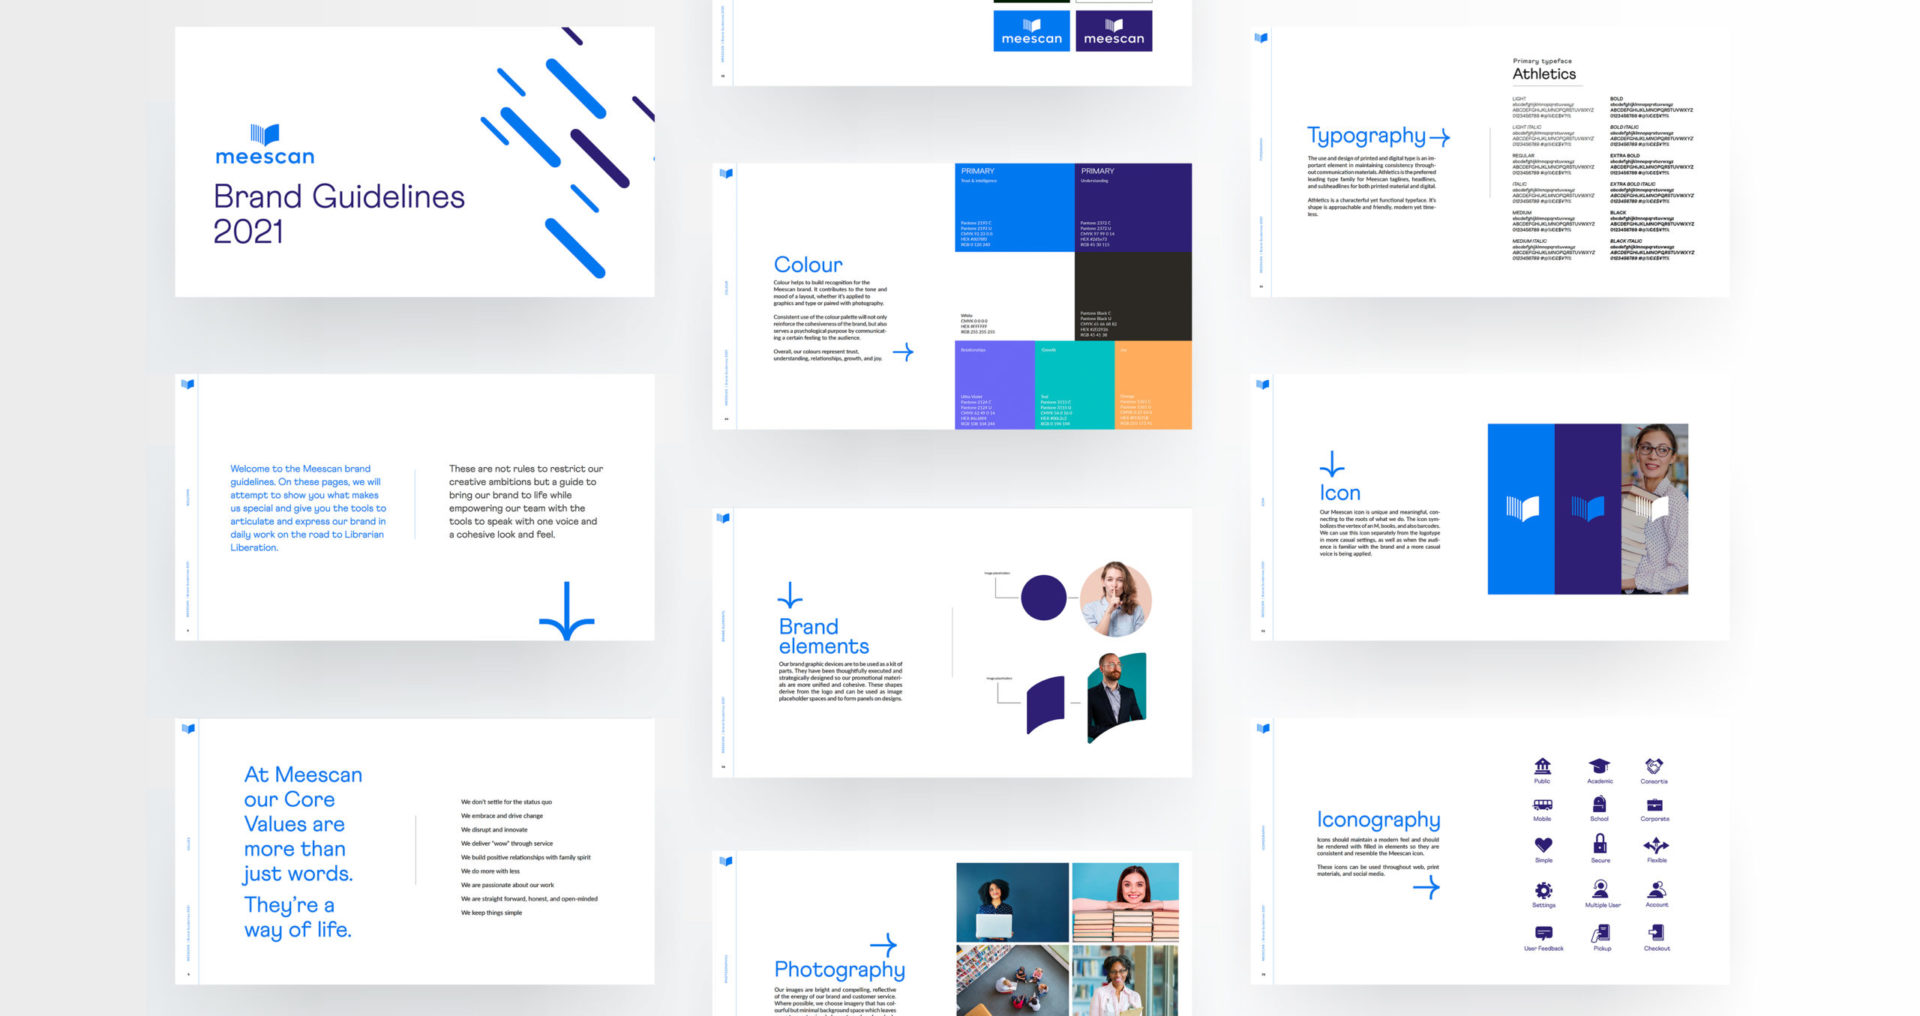 messcan brand guidelines